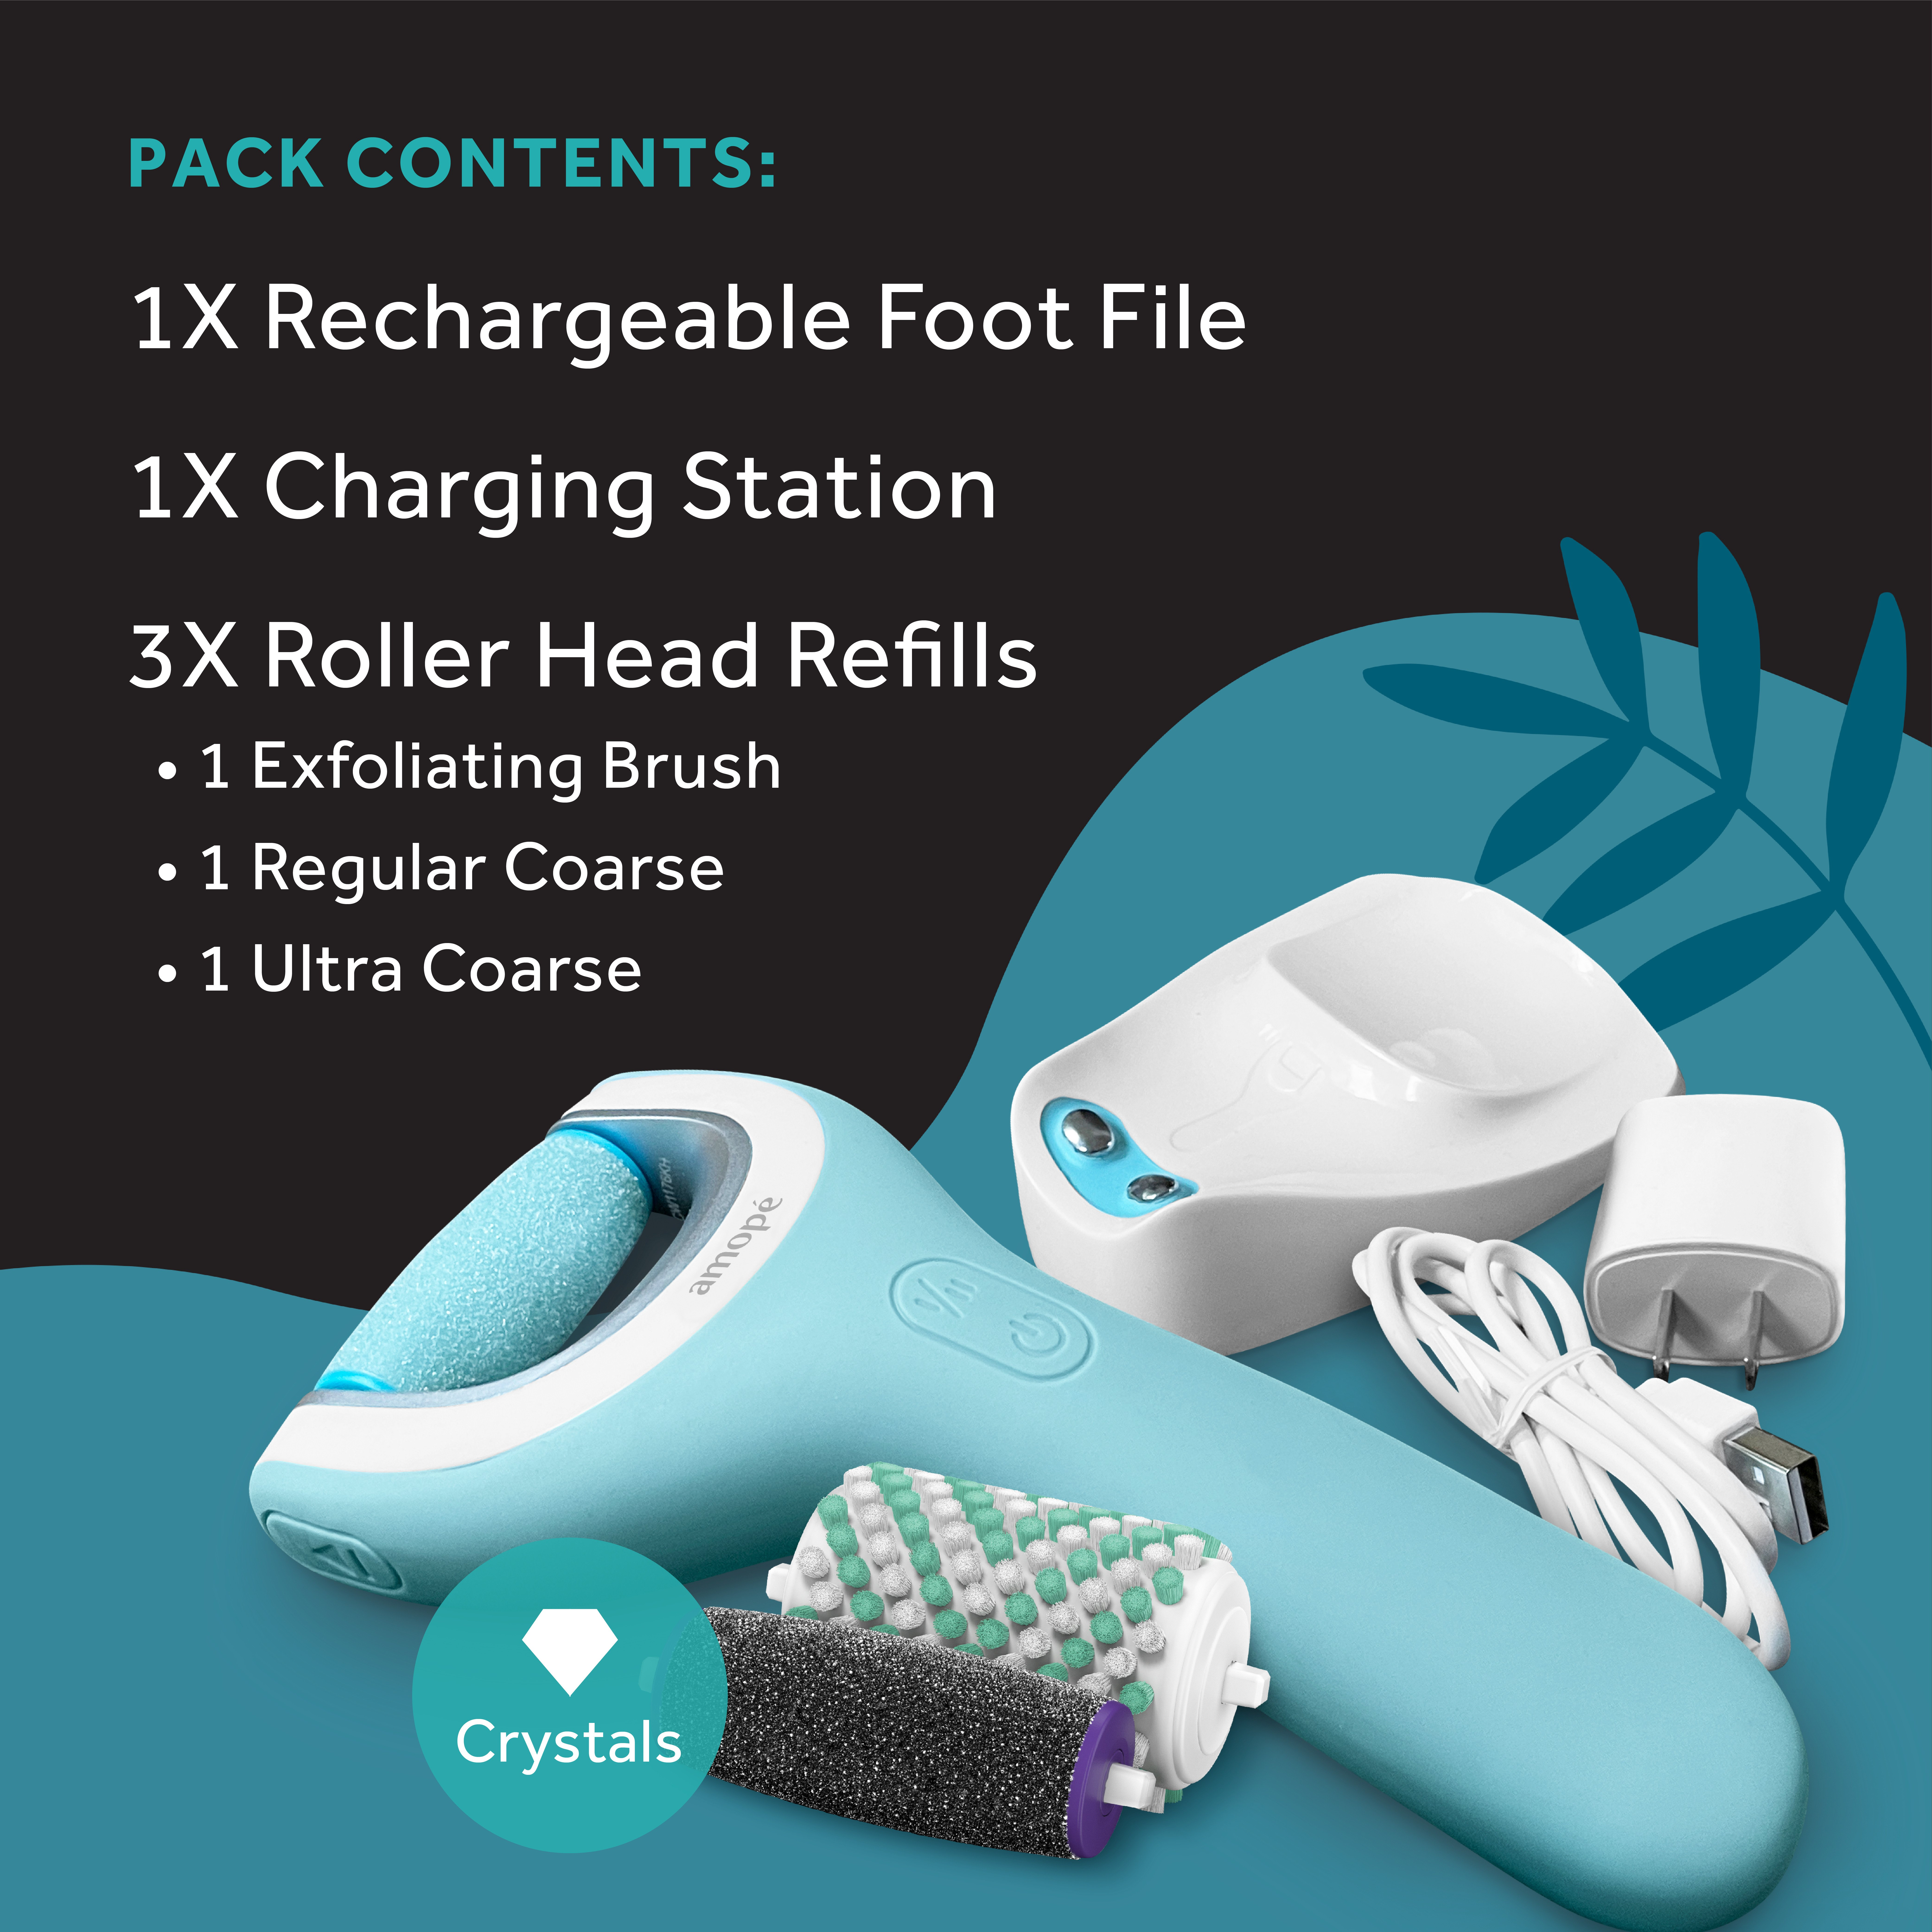 image of pack contents